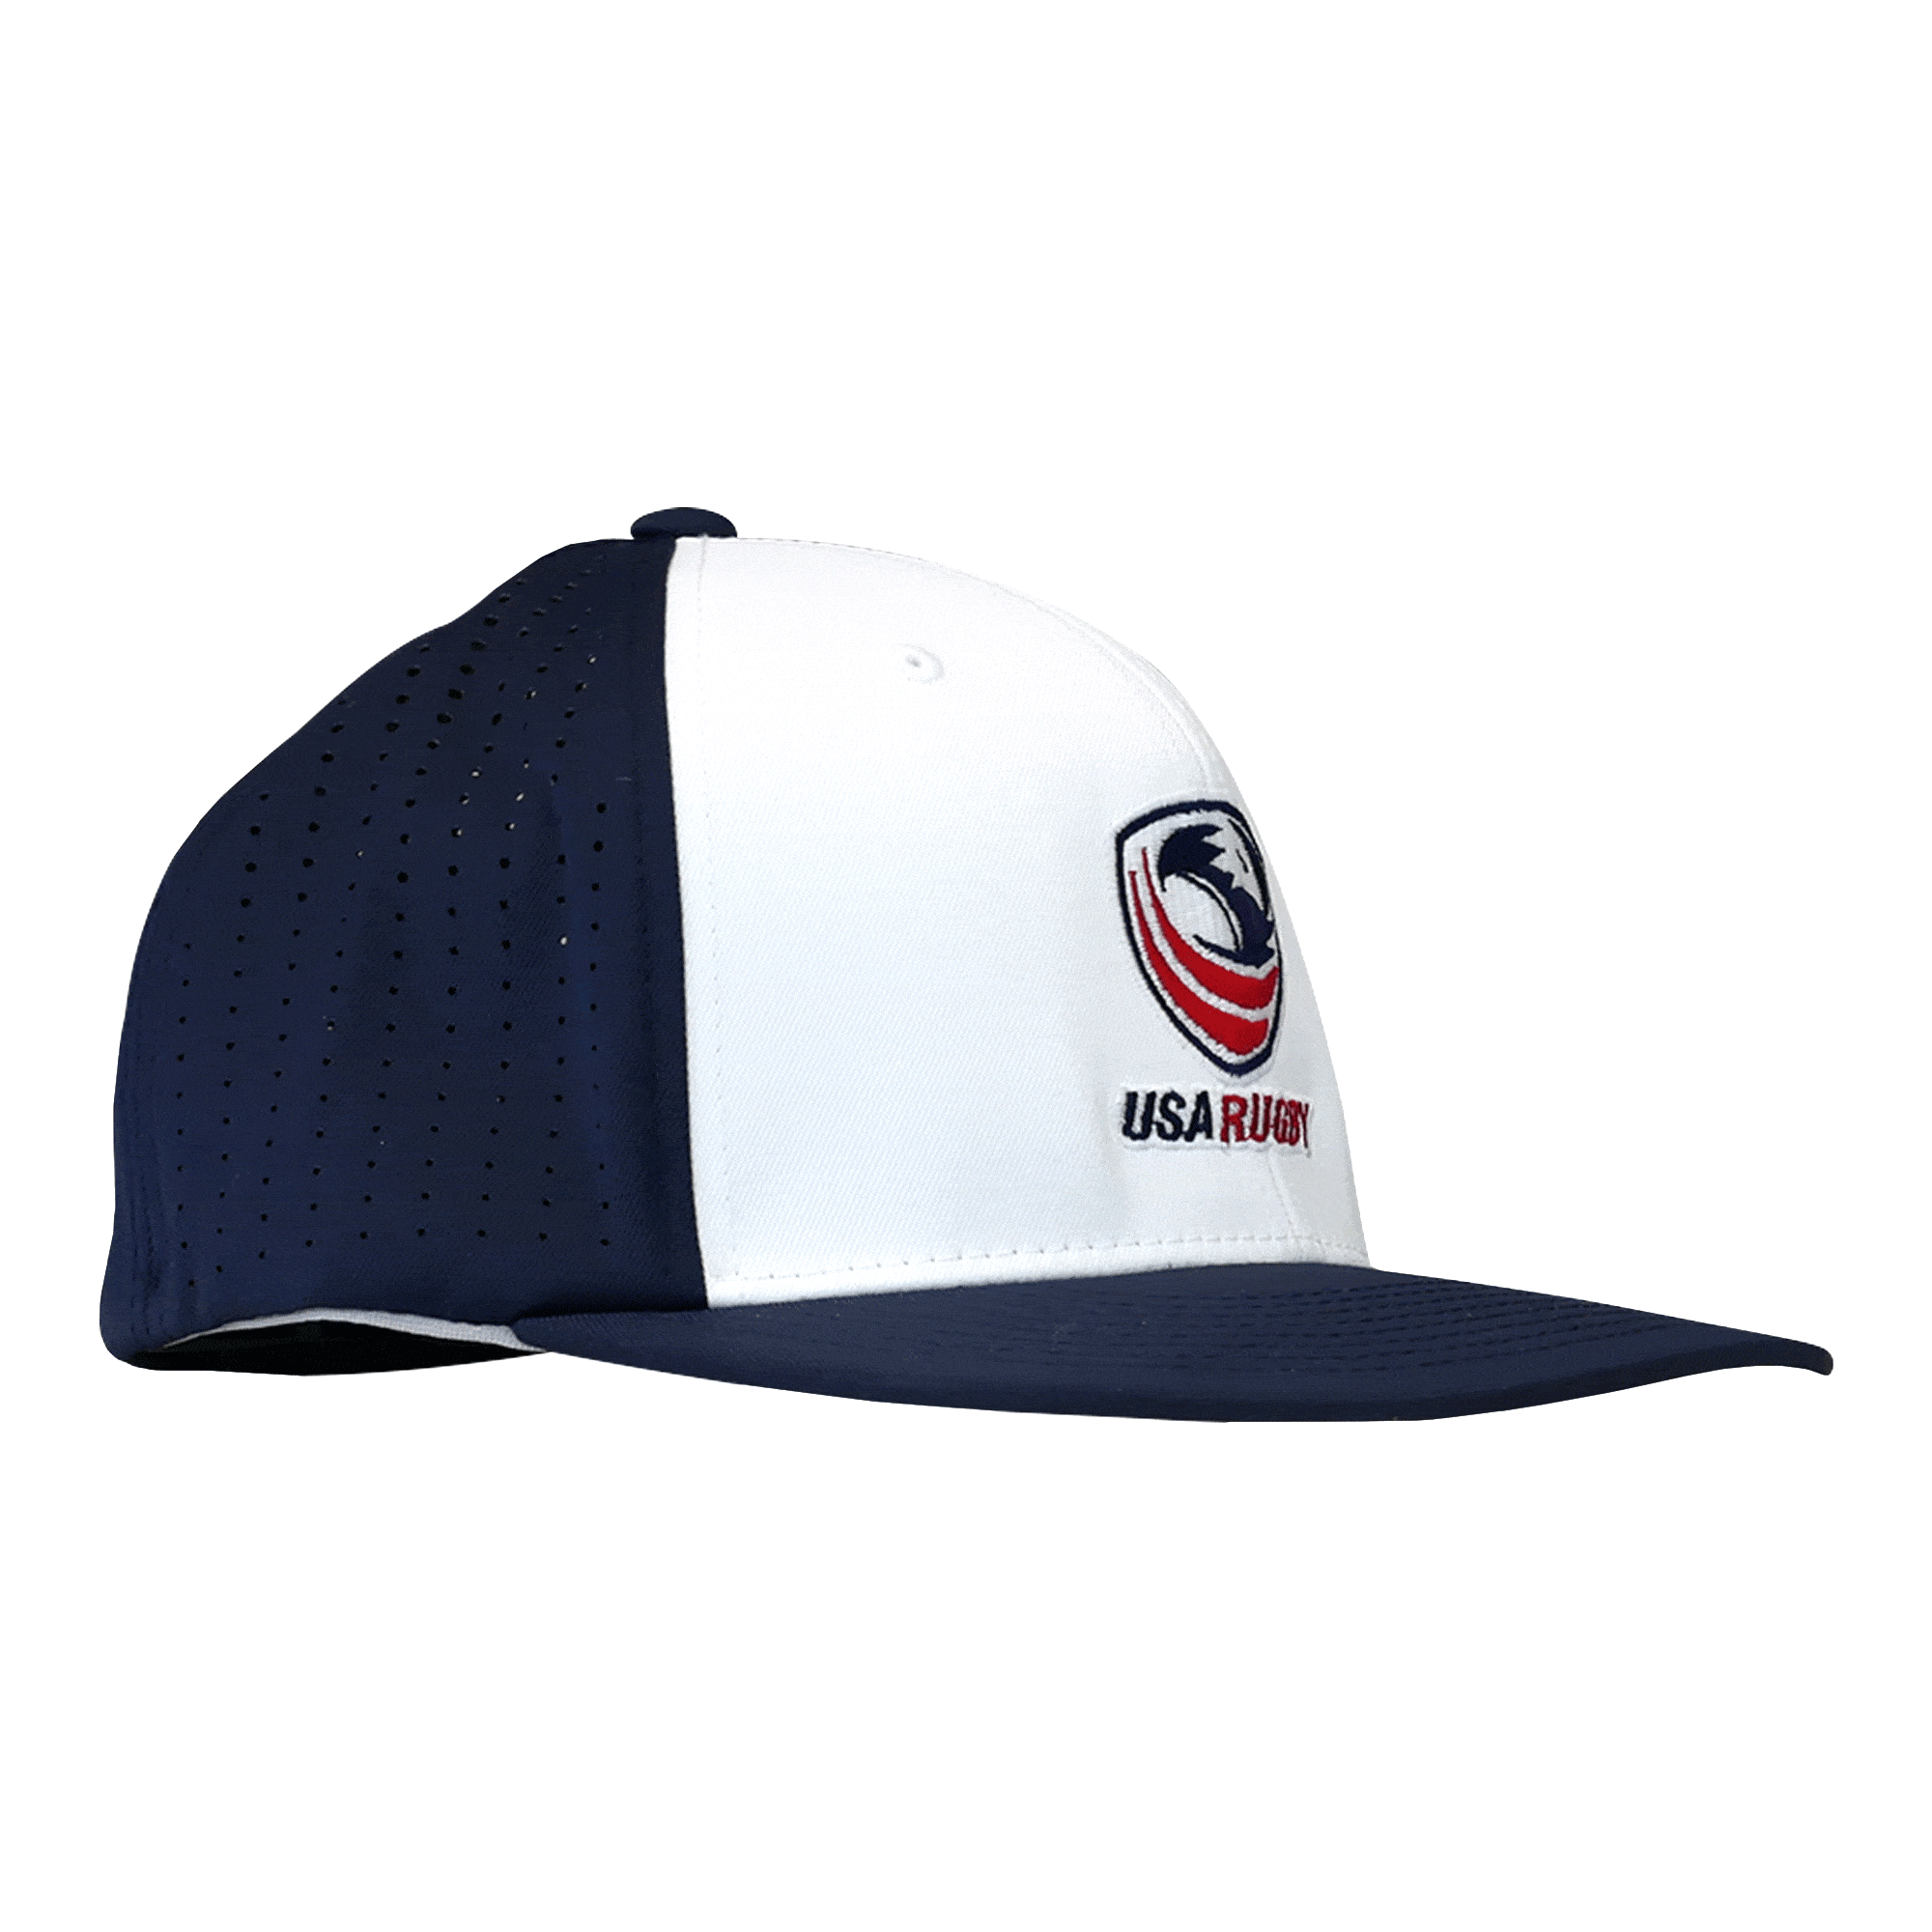 USA Rugby Perforated Performance Rugby World Flexfit Shop - Cap